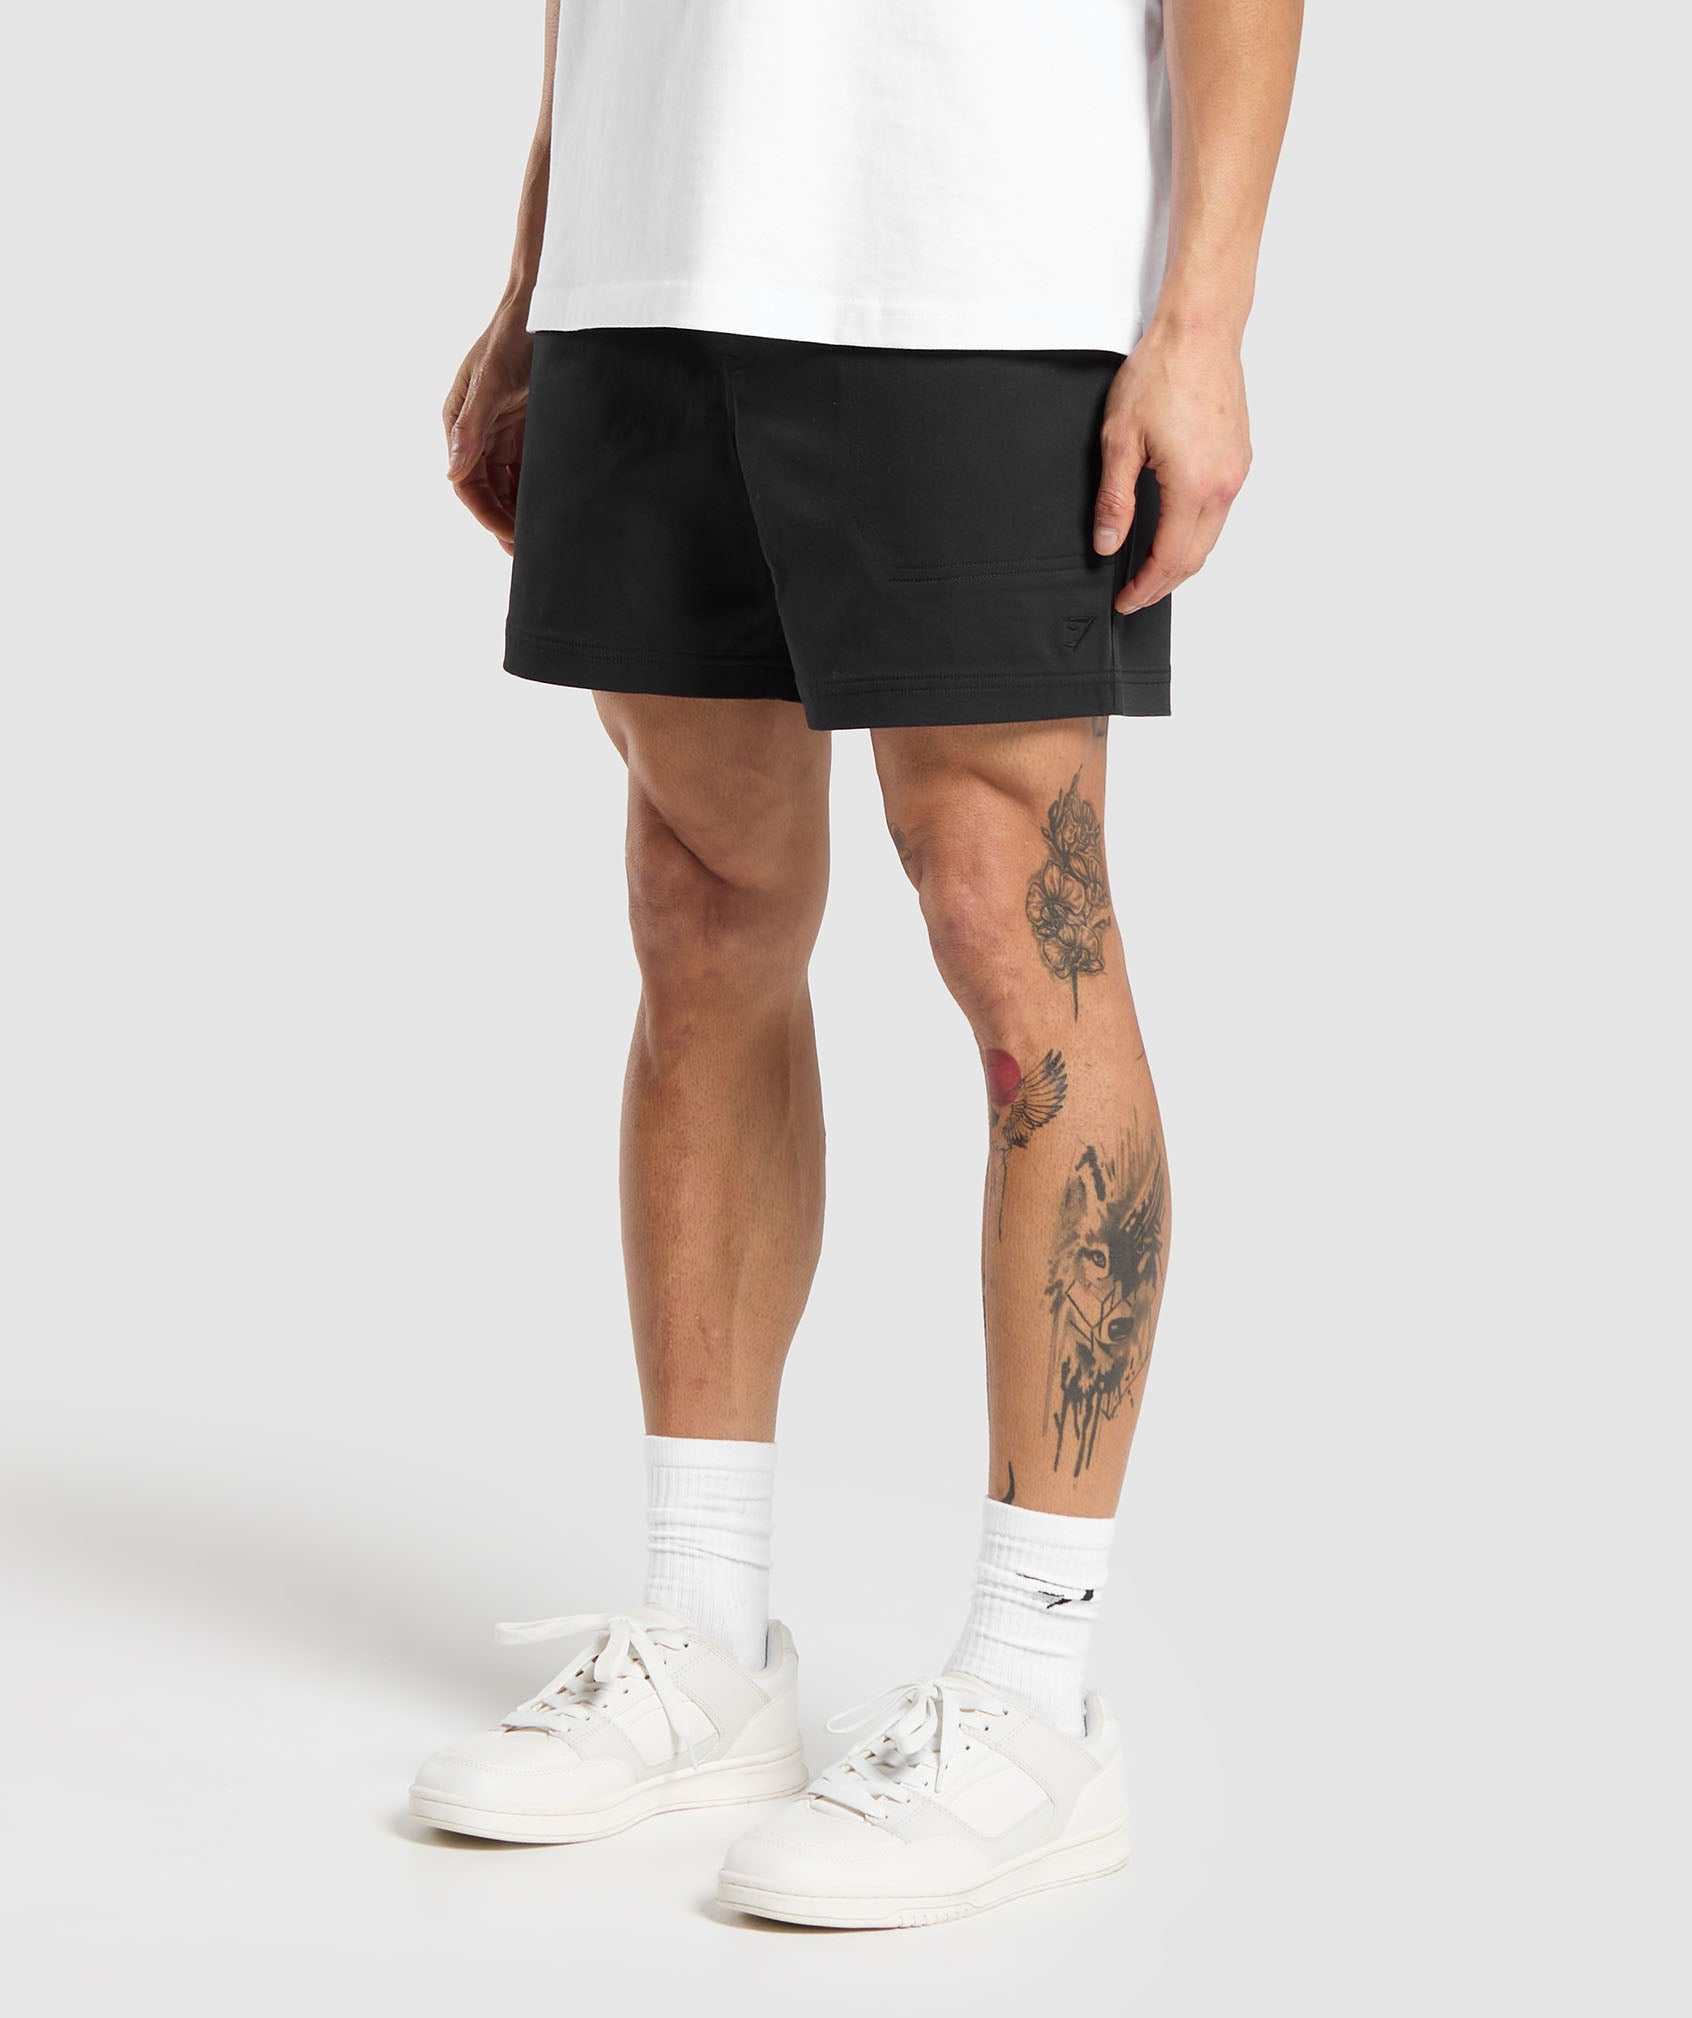 Rest Day Woven Shorts in Black - view 3